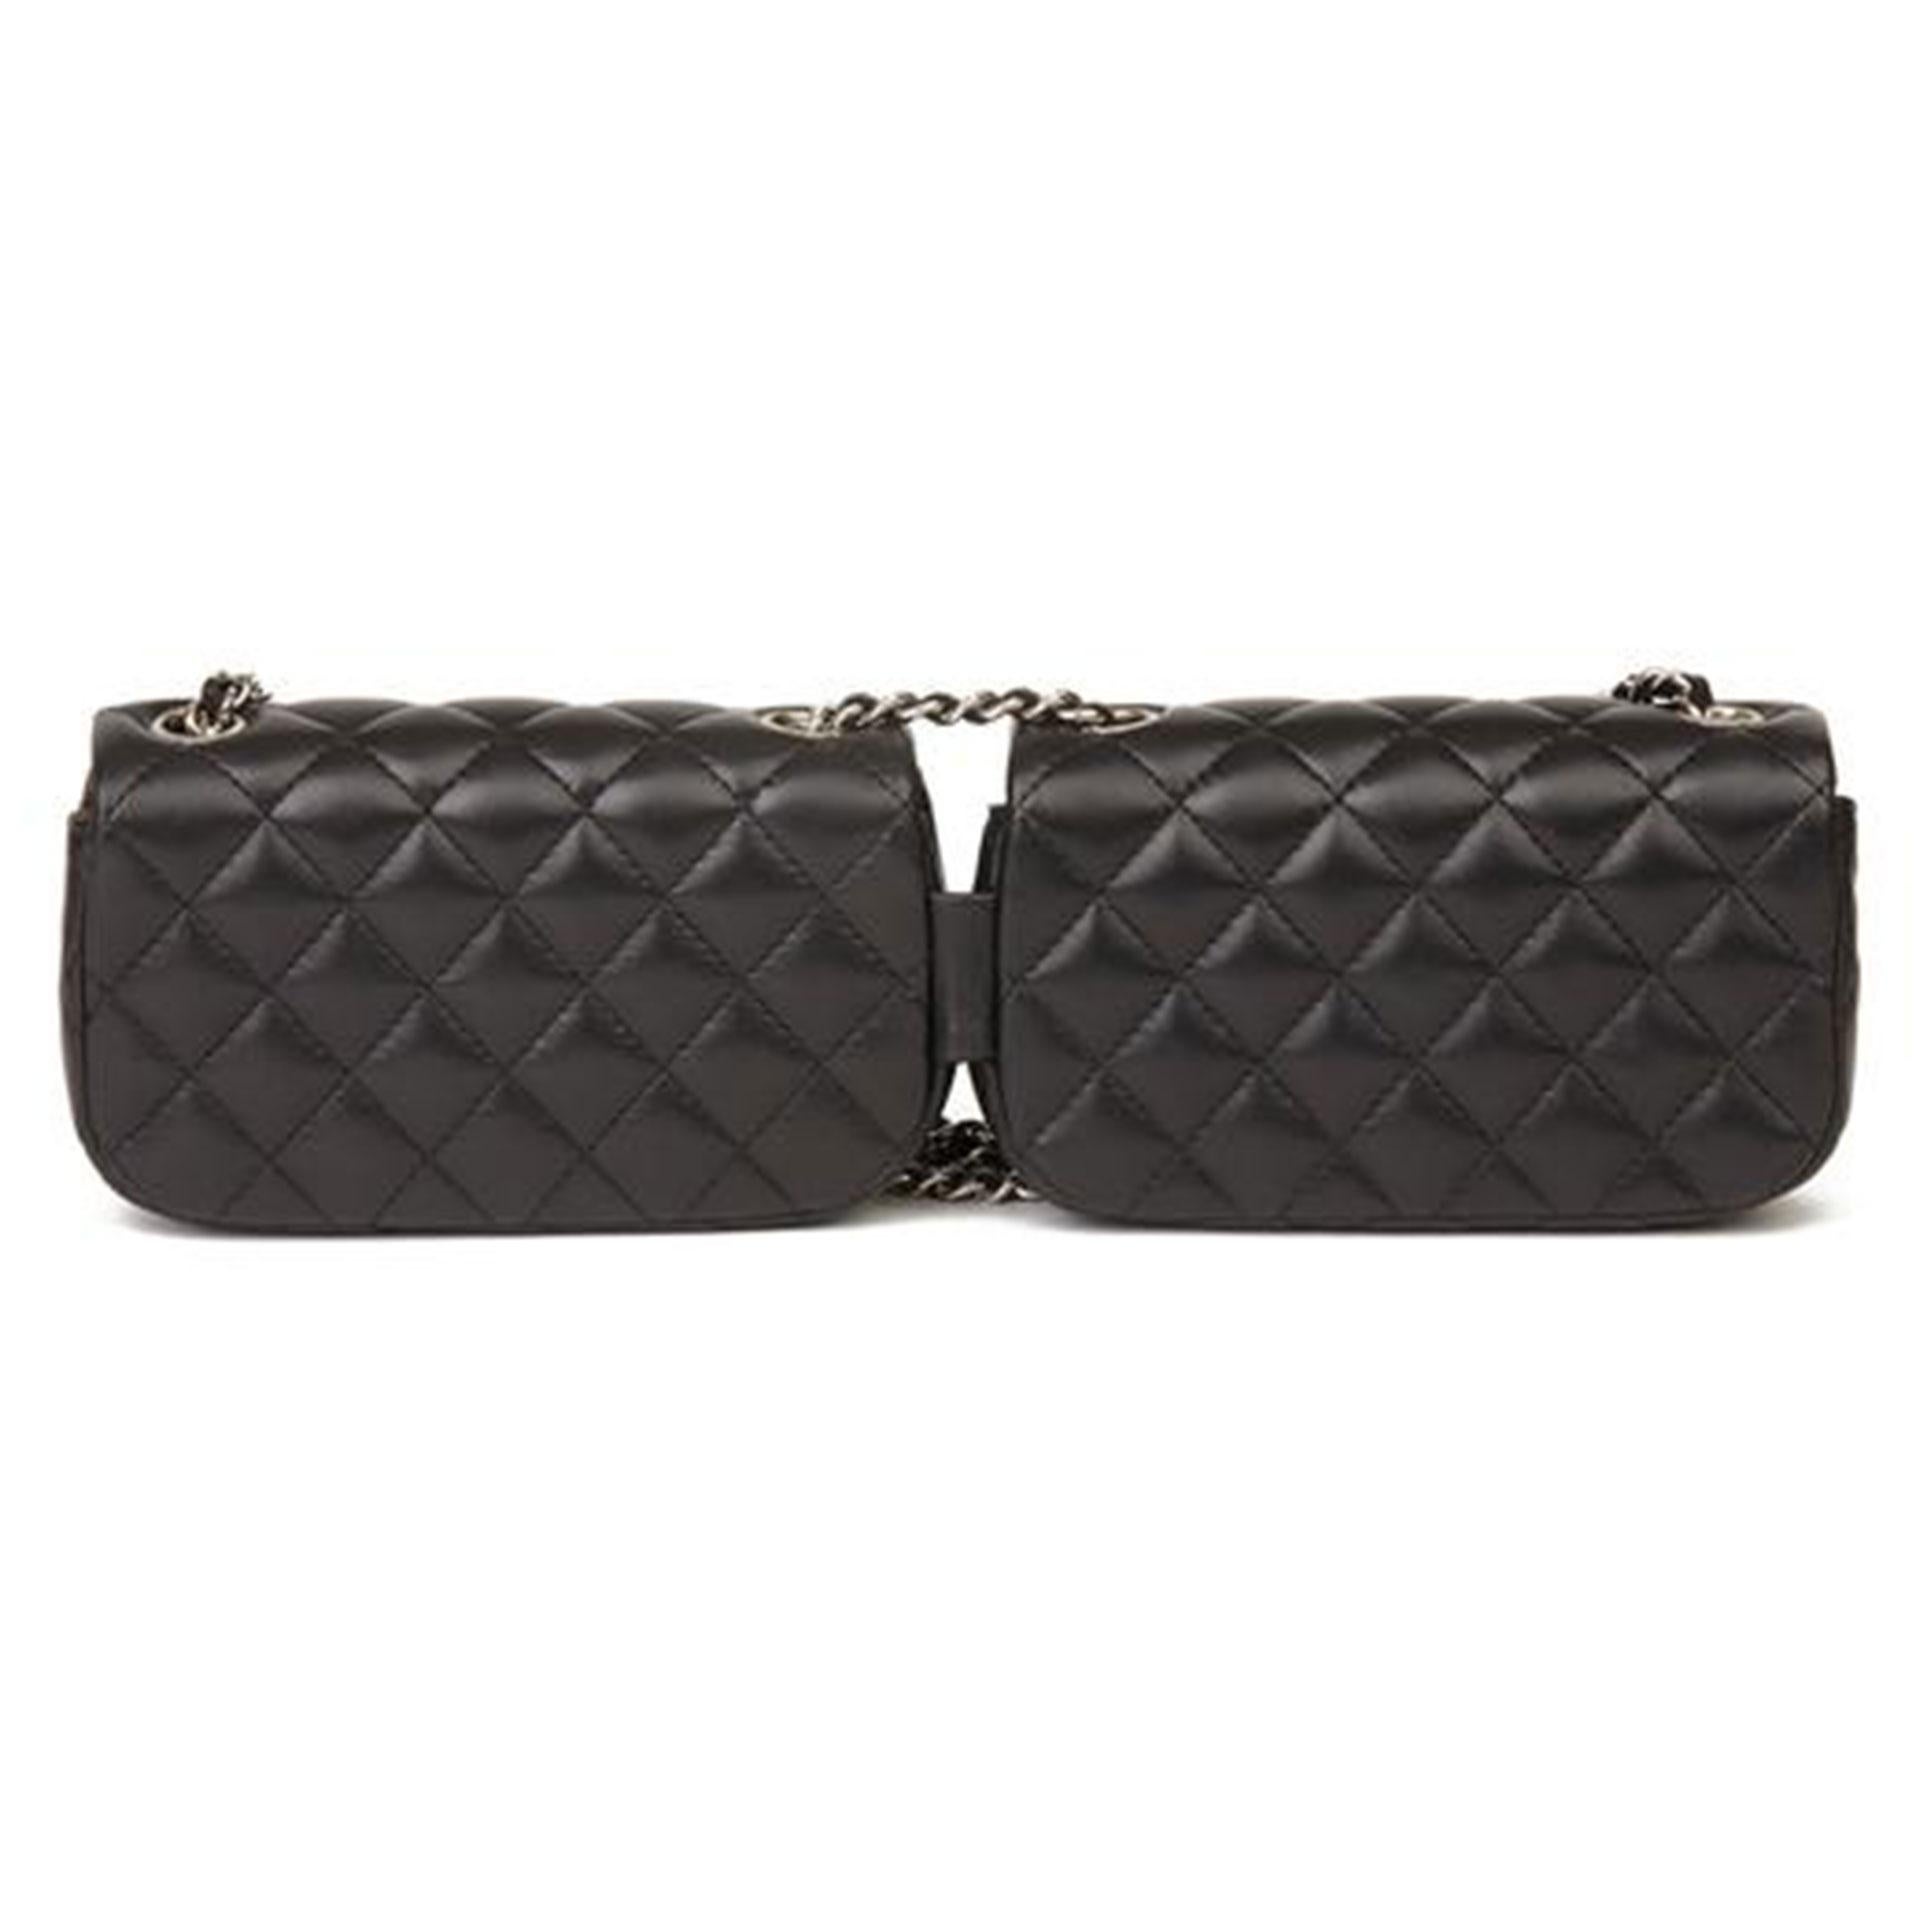 Chanel Side Pack Classic Flap 2.55 Reissue Rare Limited Edition Double Bag Set In Good Condition For Sale In Miami, FL